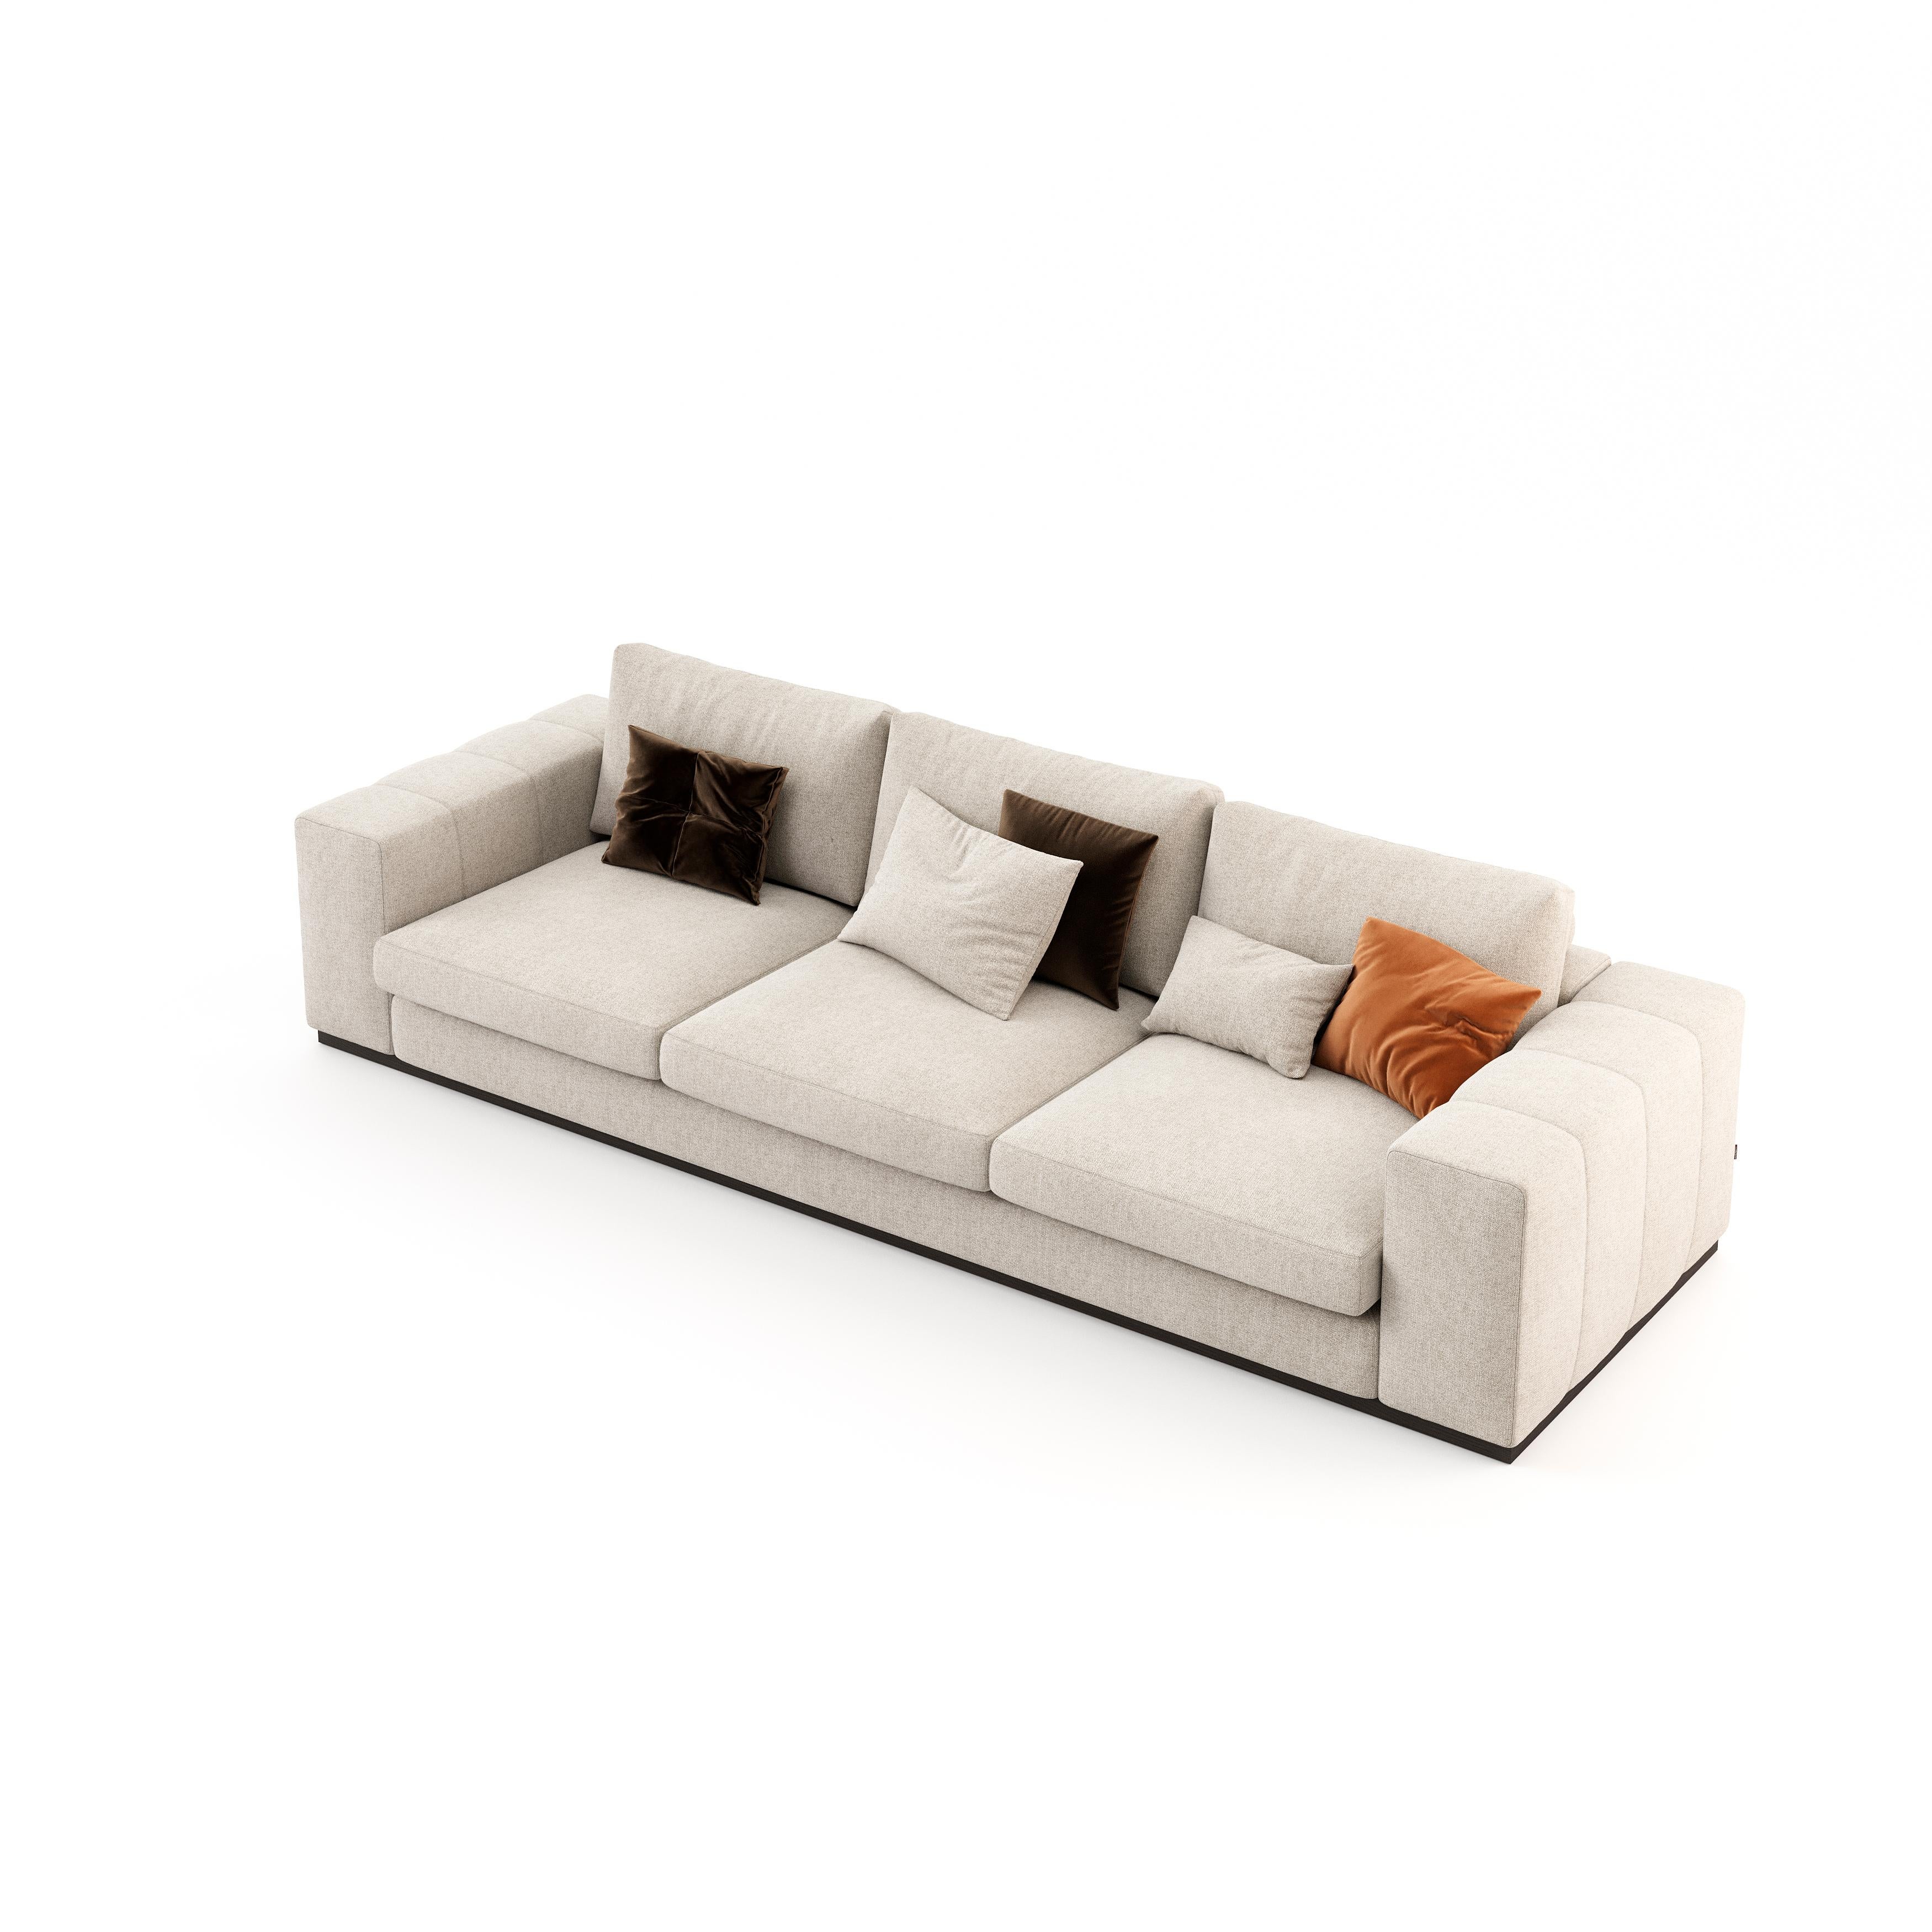 Portuguese Charlie couch with contemporary design fully customisable For Sale